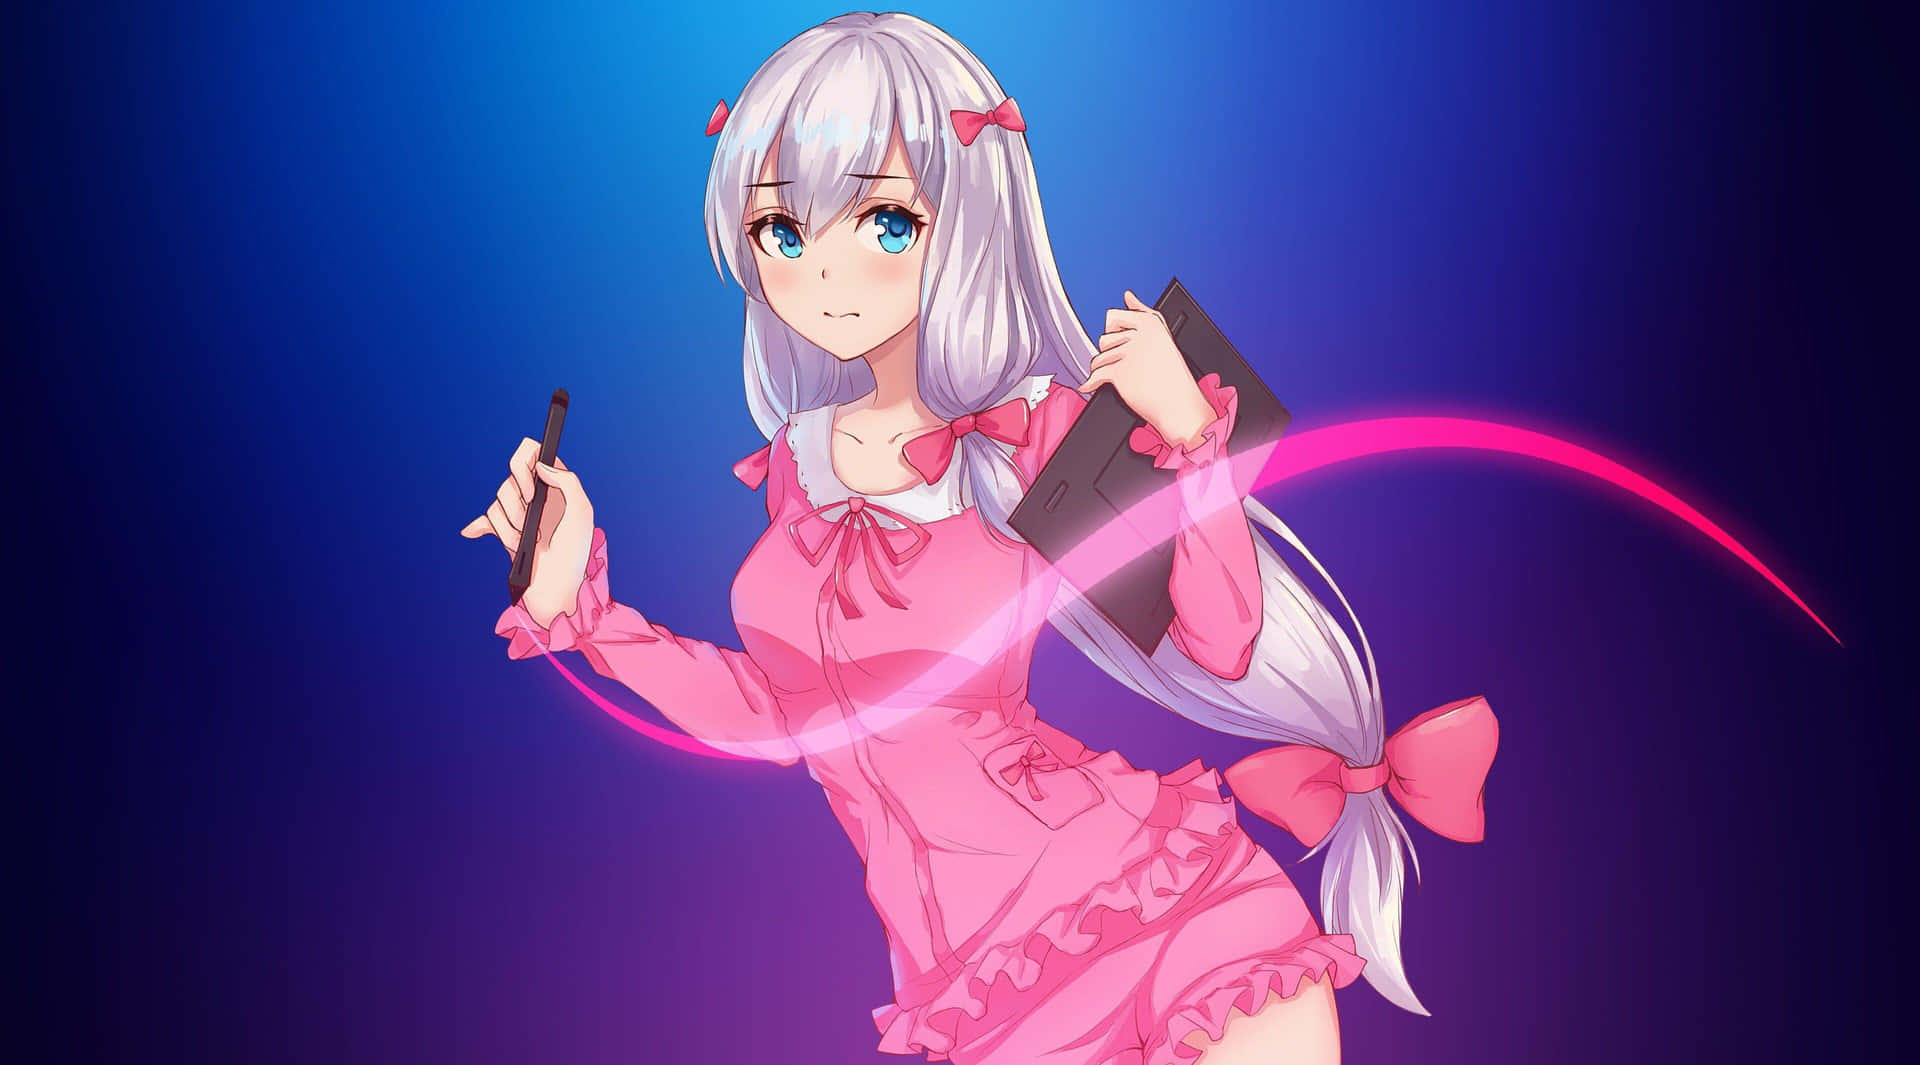 Anime Girl In Pink With Magic Wand Wallpaper